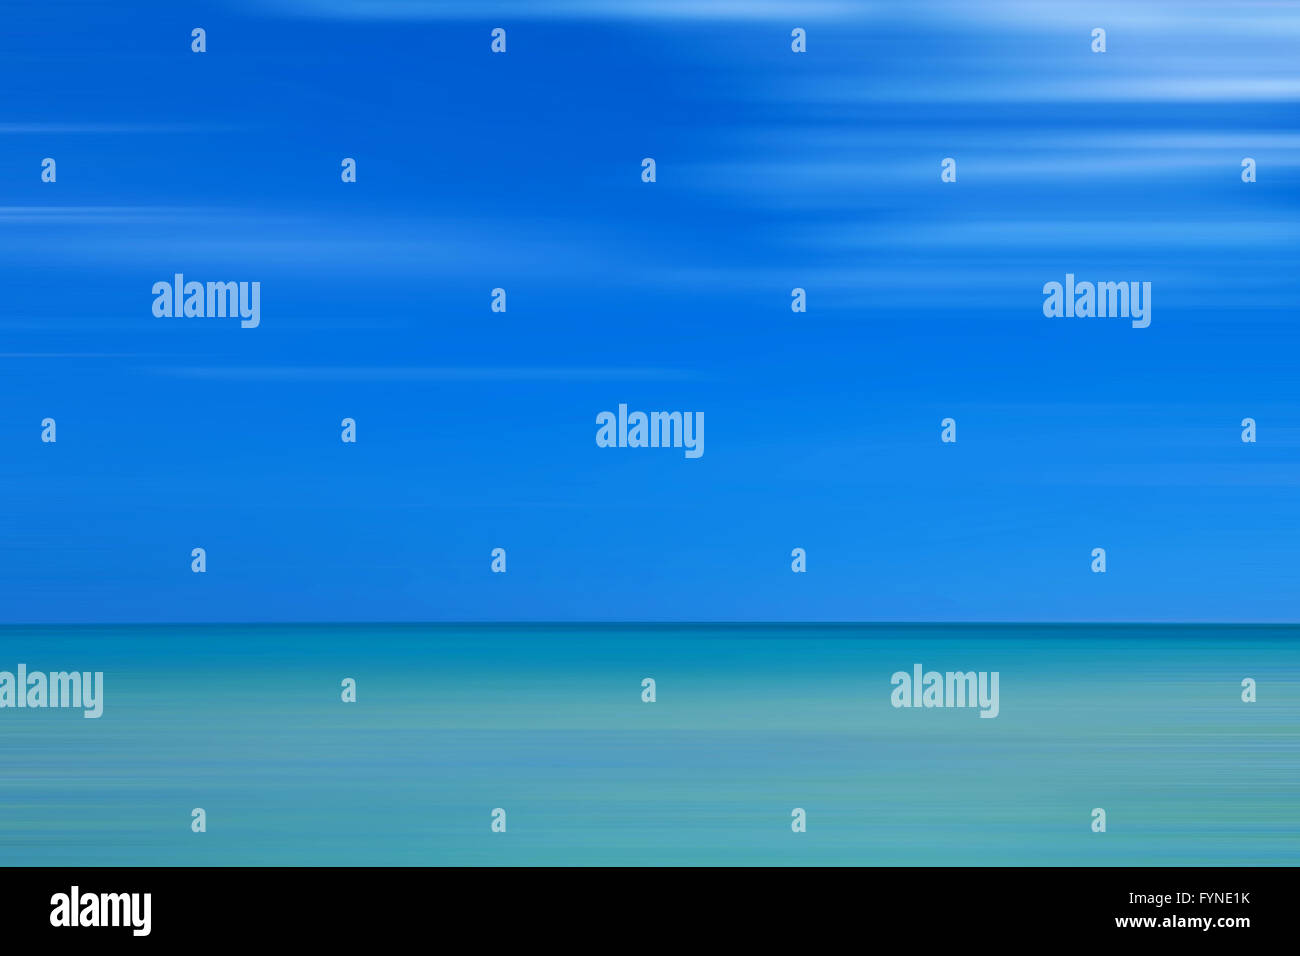 Blurred sea horizon. One third of the image is green, two-thirds of the image are blue as a sky. Stock Photo